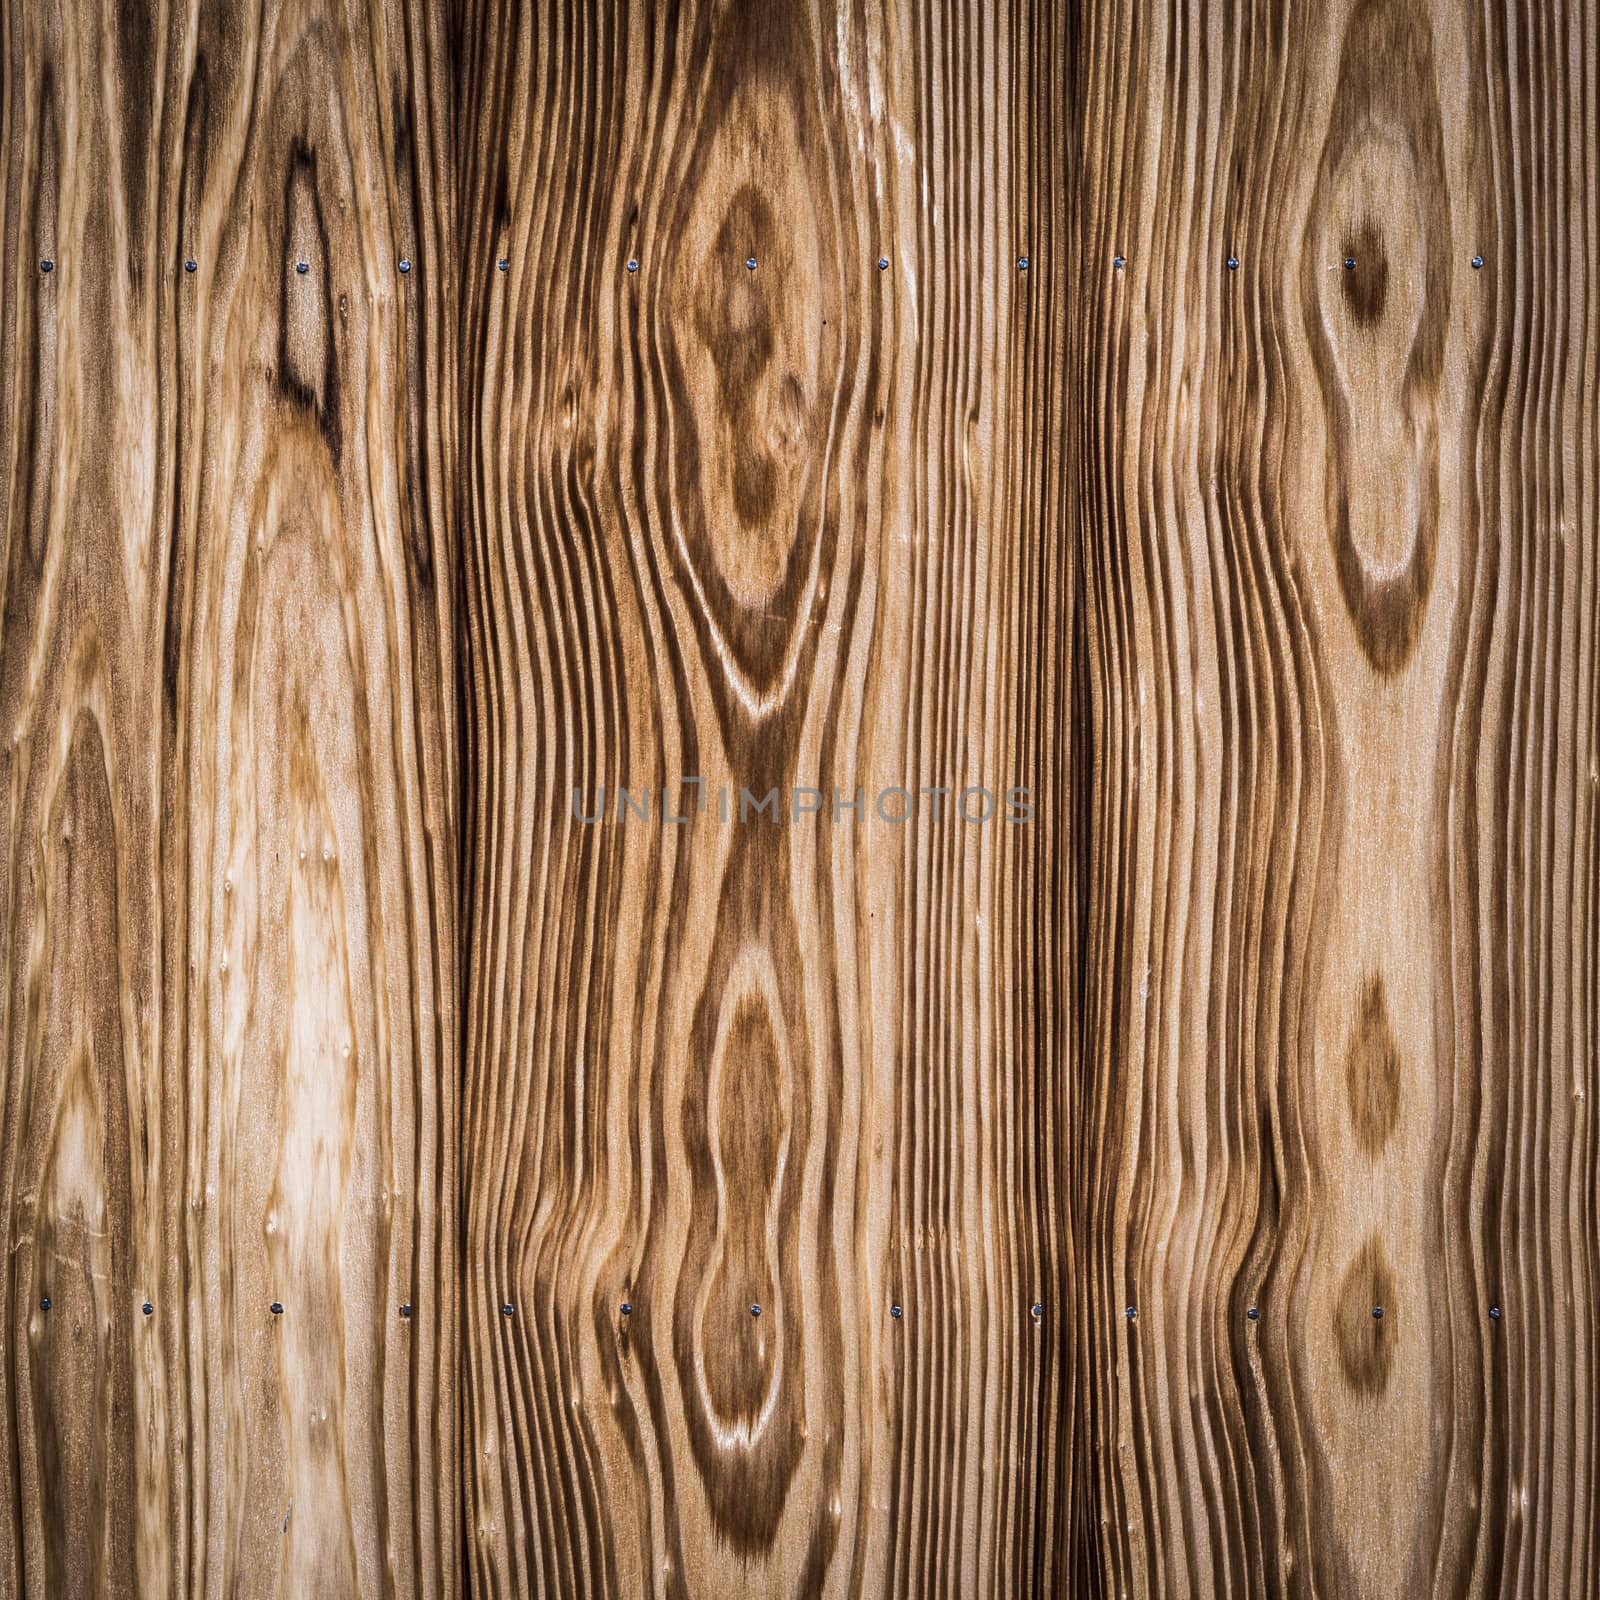 Wood plank background and texture by 2nix